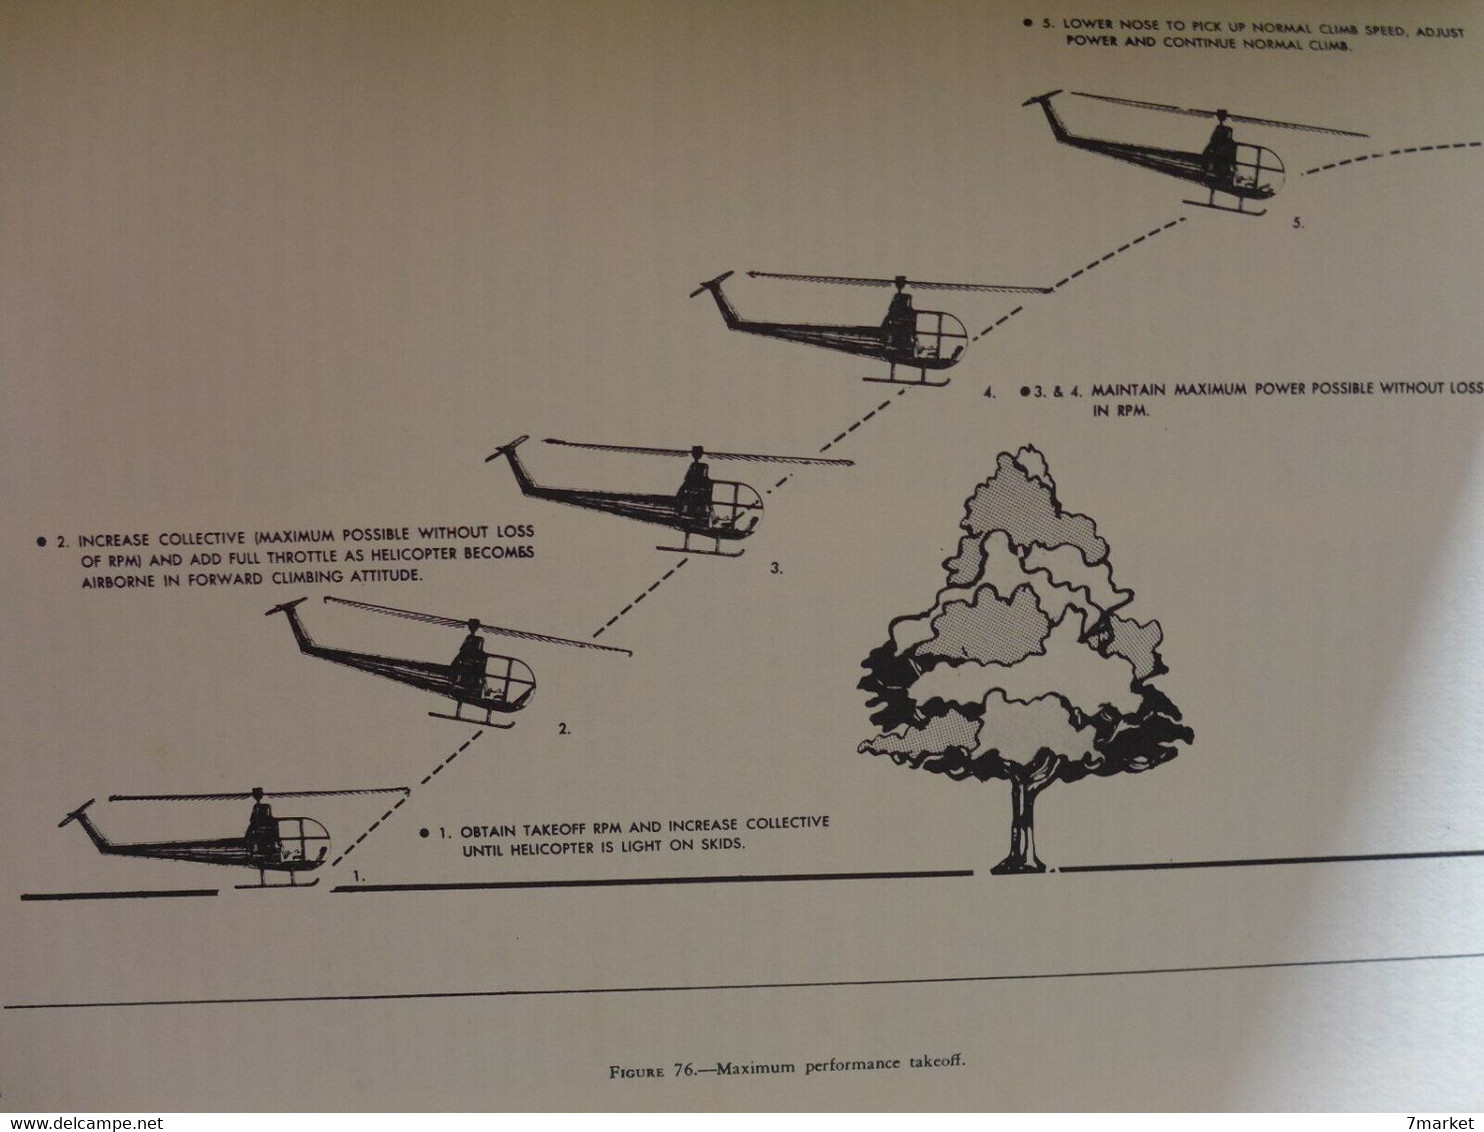 Basic Guide To Helicopters. Helicopters Aerodynamics, Performance & Flight Maneuvers / éd. Drake - 1978; En Anglais - Hélicoptères